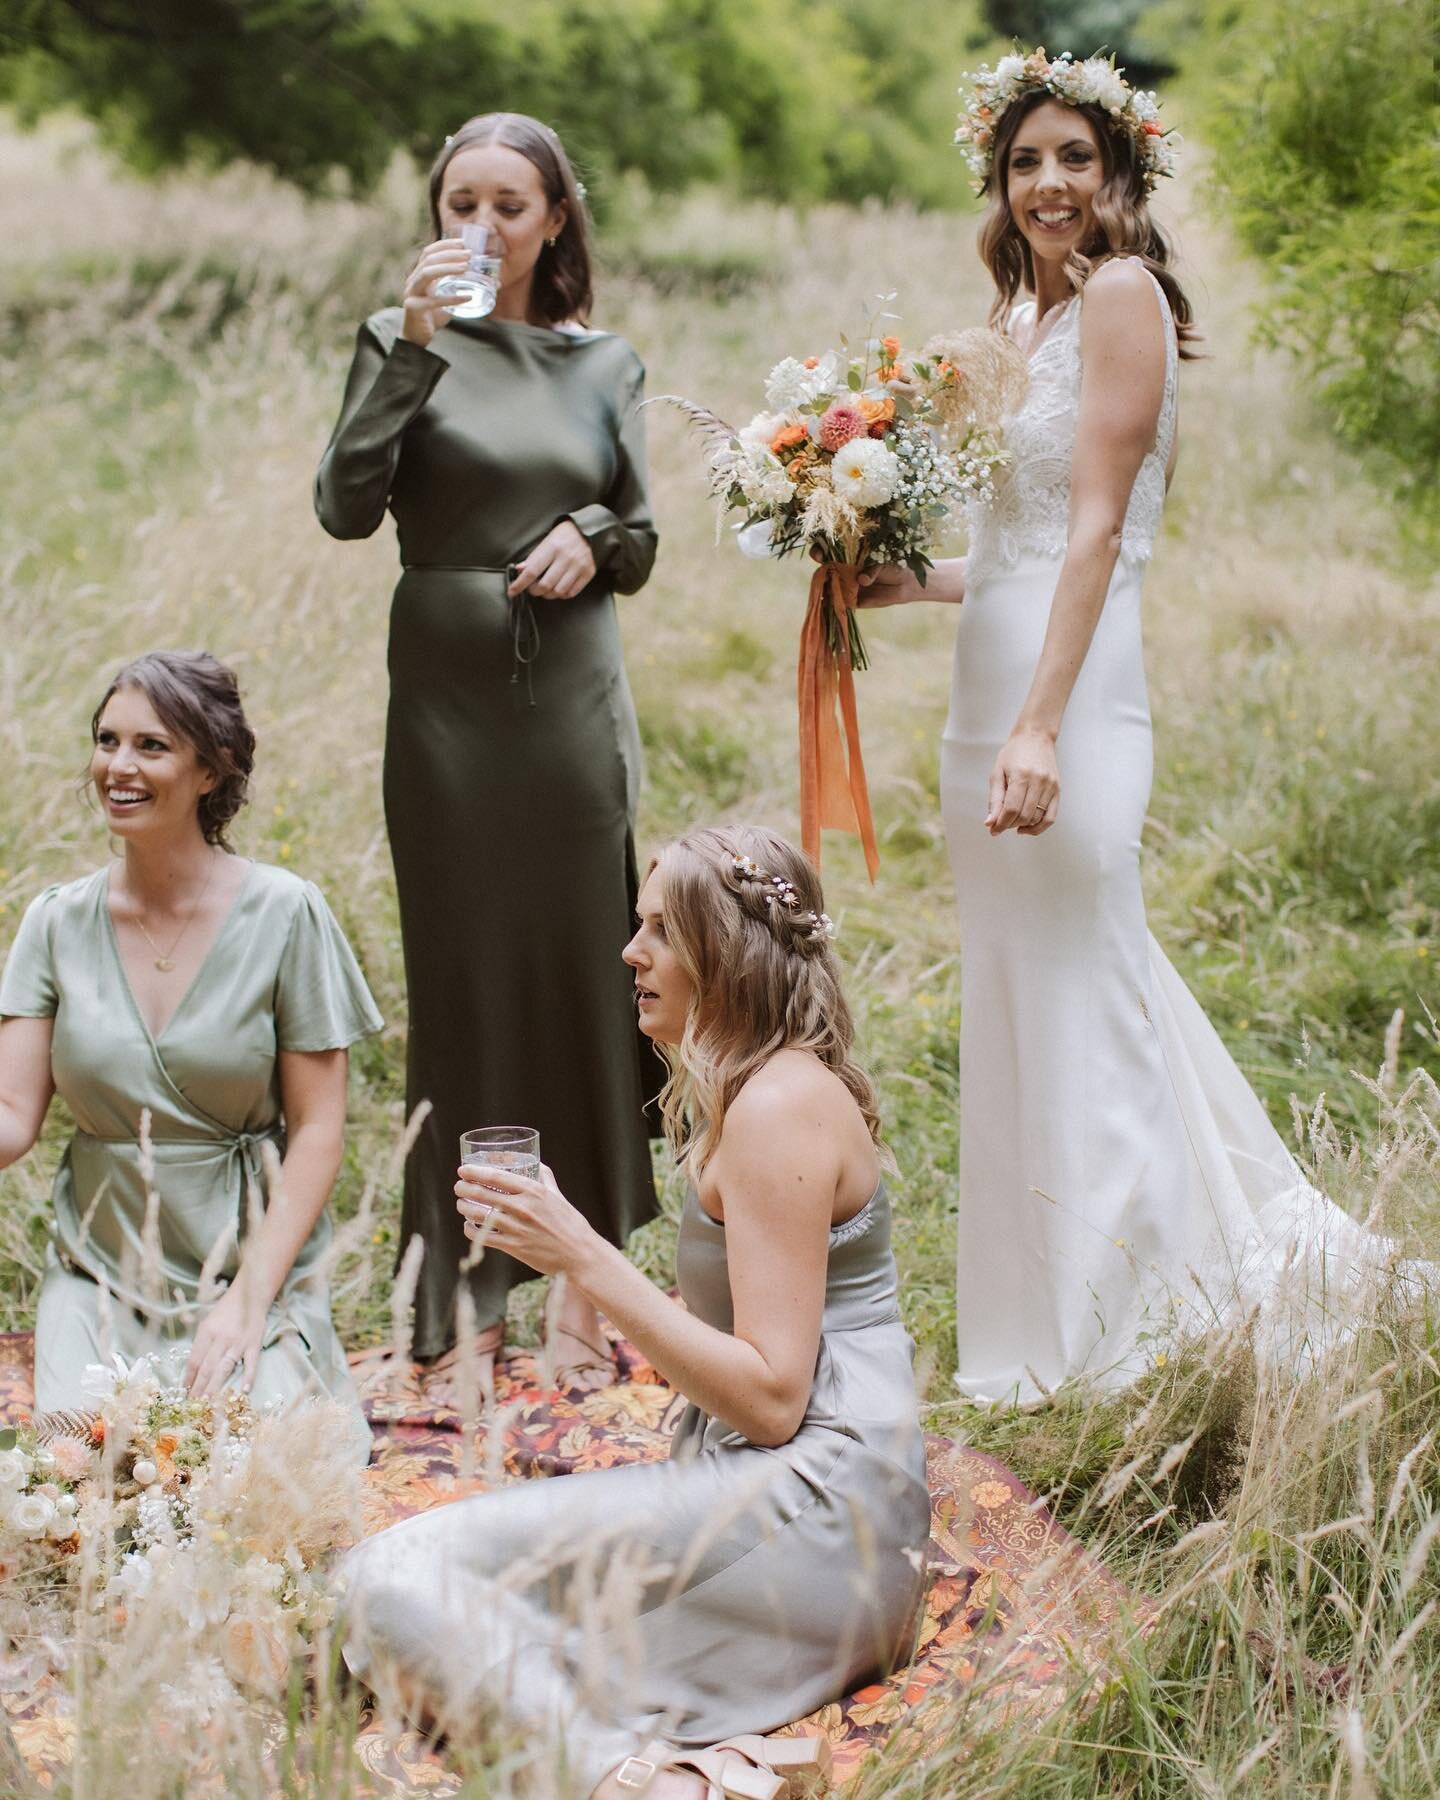 Oh Hello Sunday! Back on the gram after a busy few days and some time away from the screen. Planning out the week ahead and excited for the next few months. 

Loving this gloriously beautiful photo of the gals poppin&rsquo; champagne!

Photo @anagall